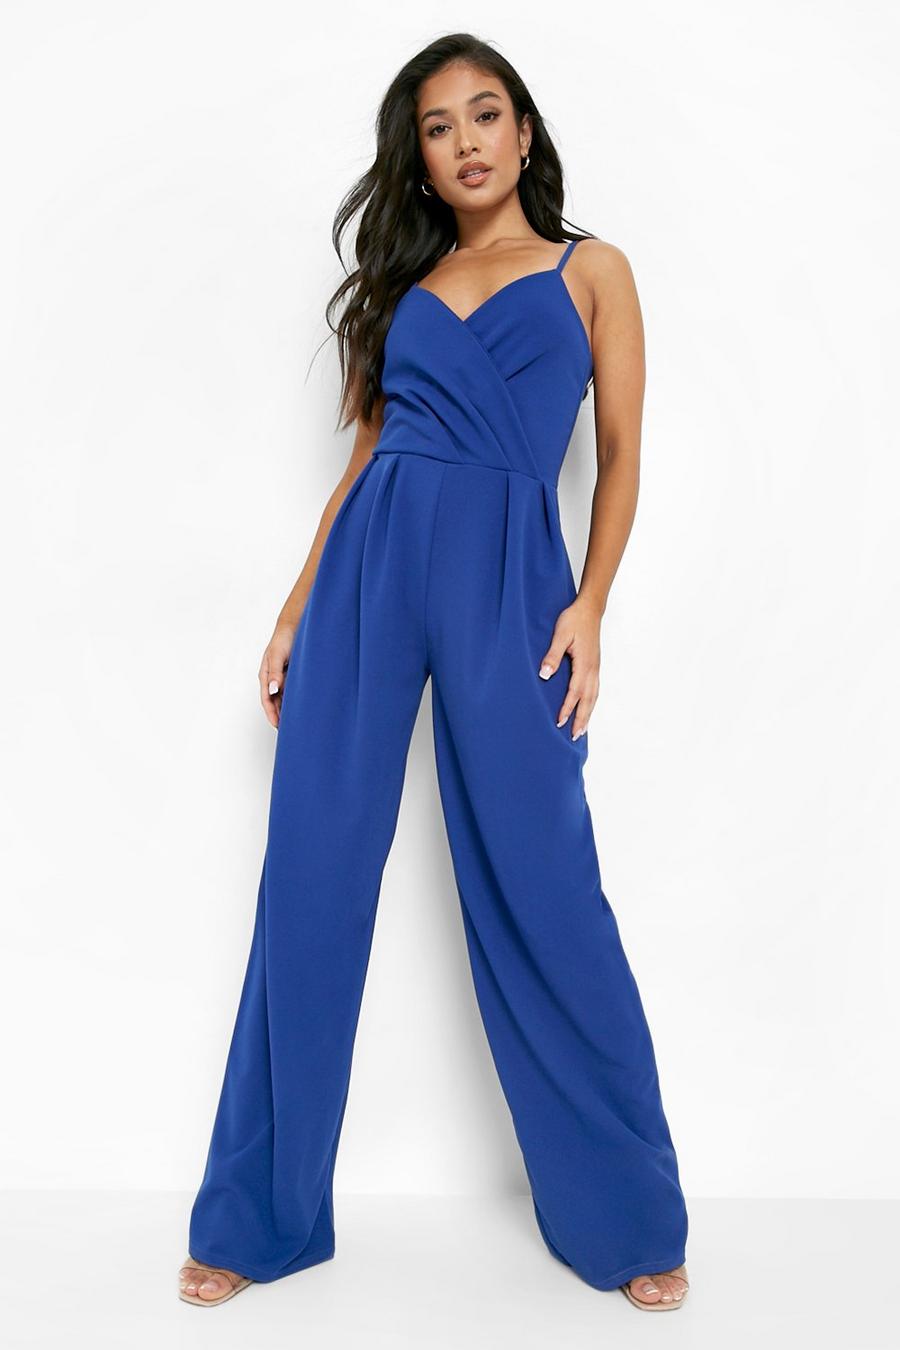 Boohoo Petite Cut Out Detail Wide Leg Jumpsuit in Cornflower Blue Blue Womens Clothing Jumpsuits and rompers 